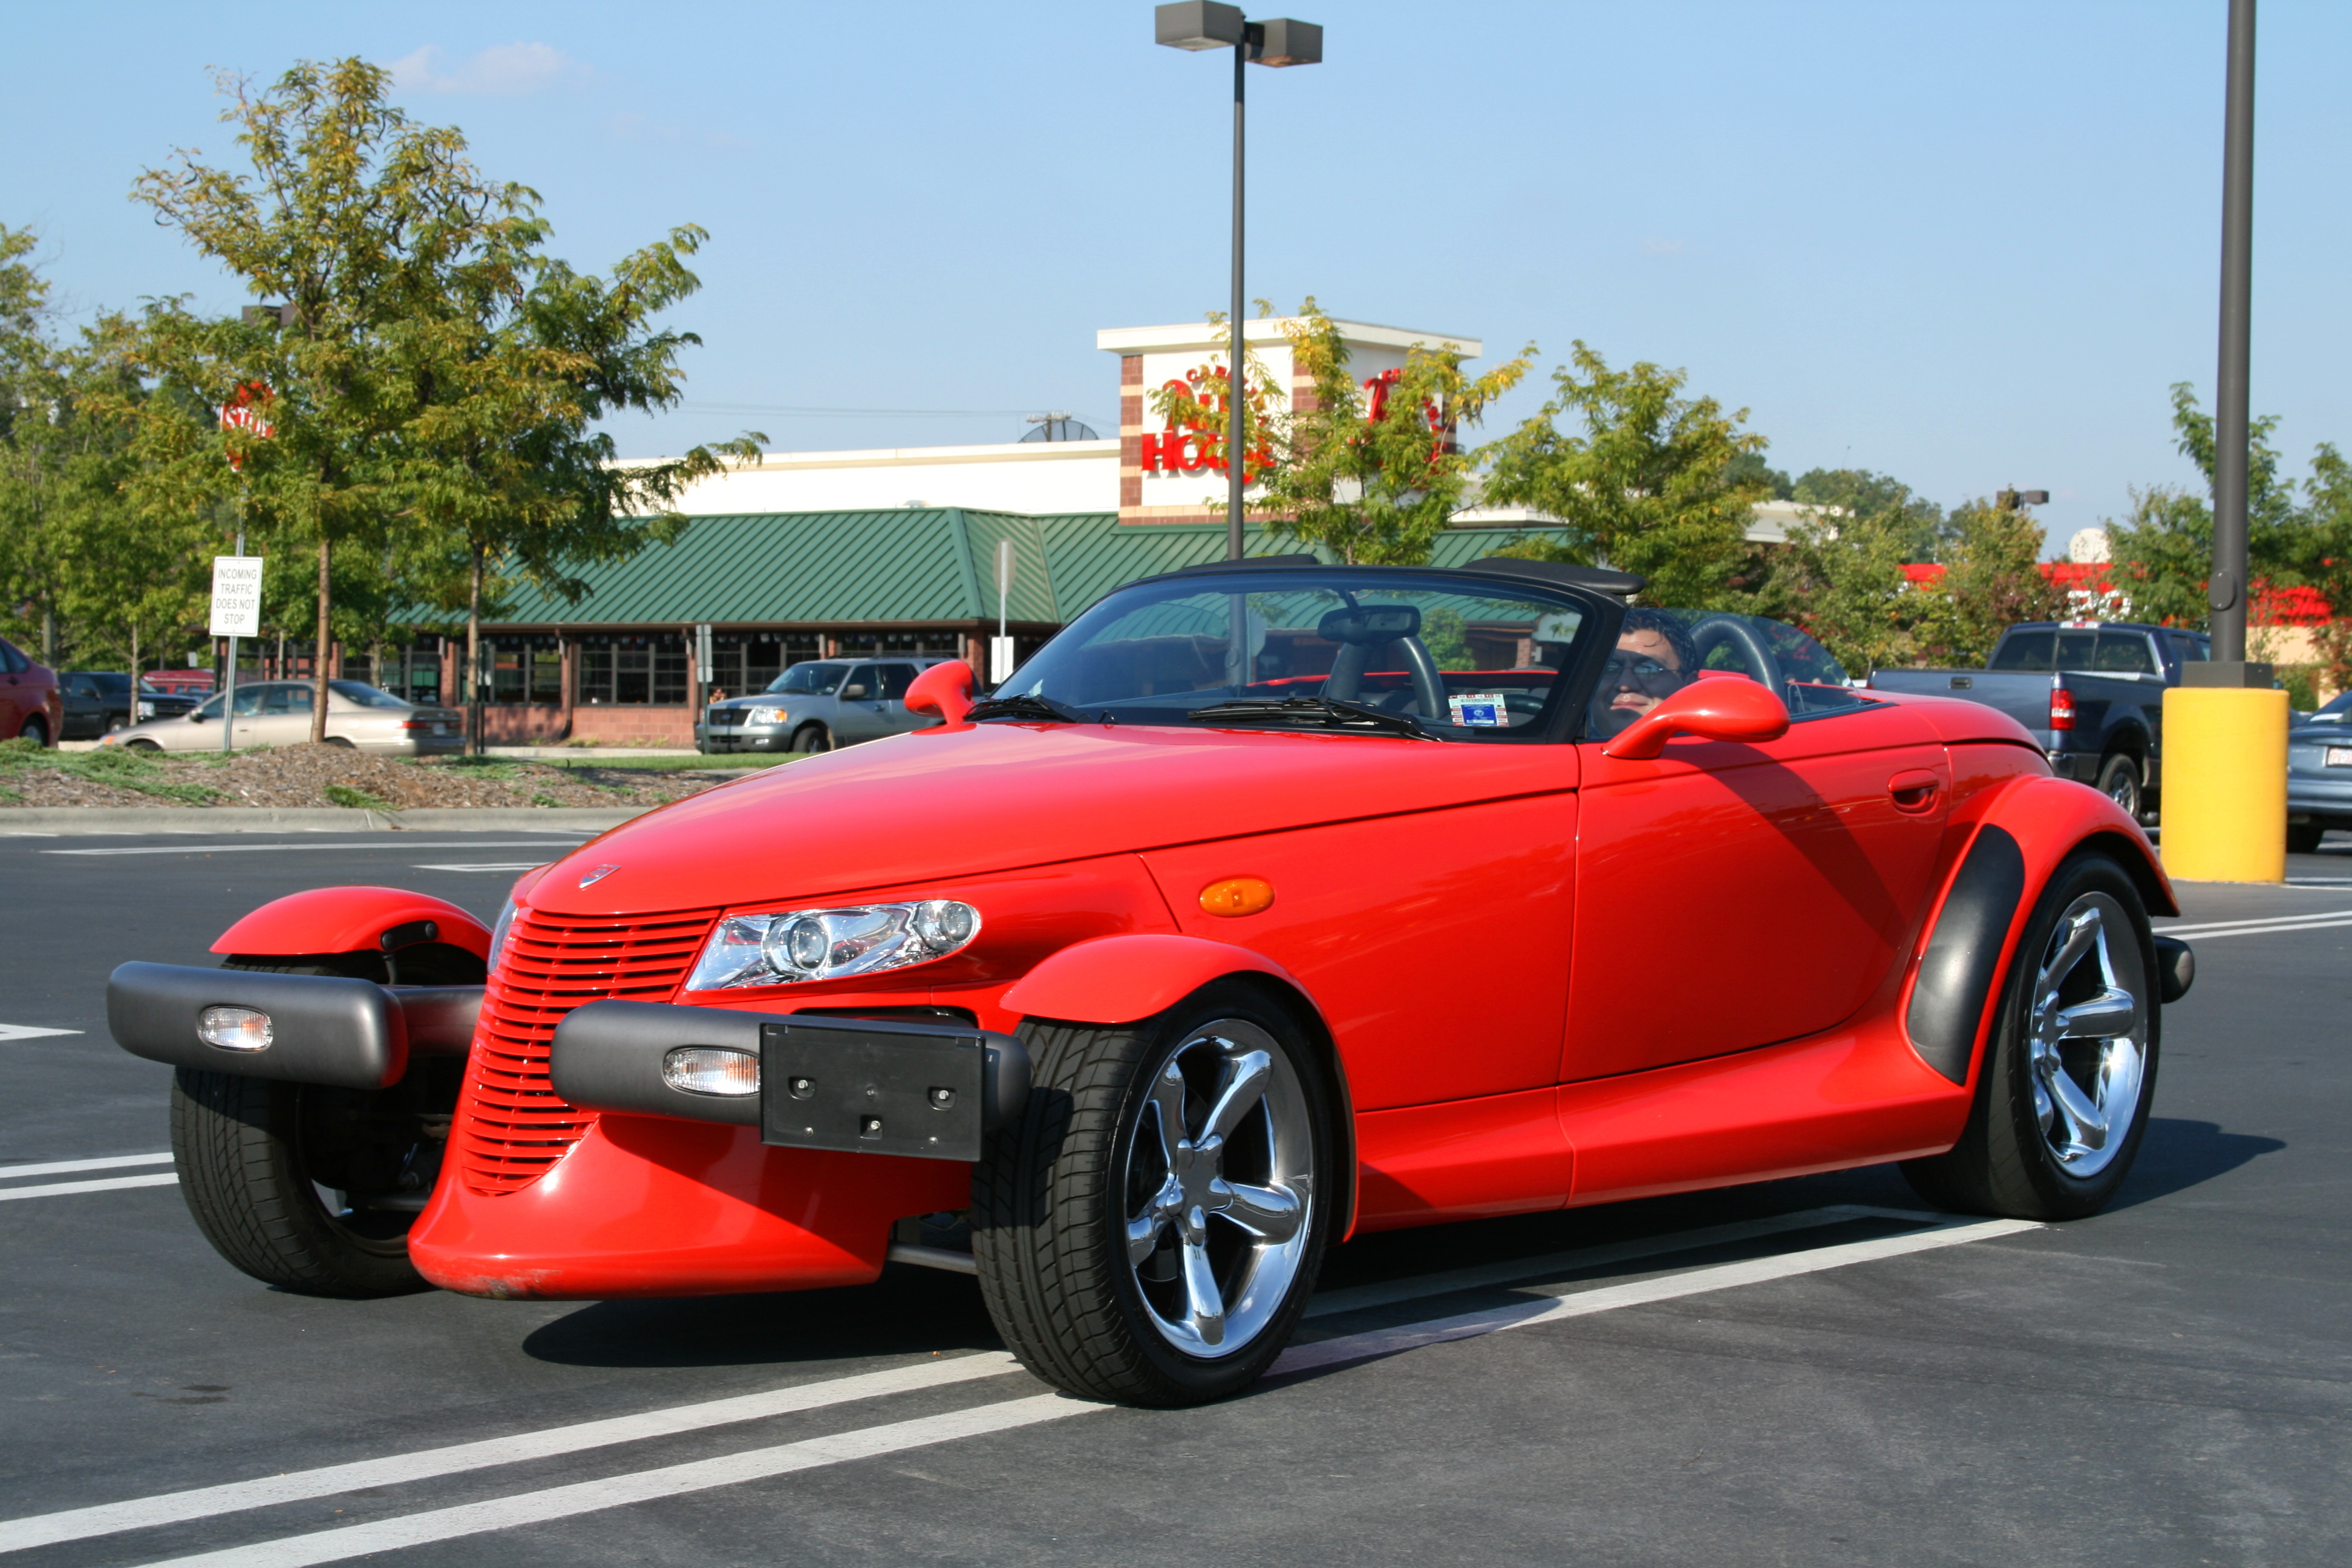 2008-10-05_Red_Plymouth_Prowler_at_South_Square.jpg